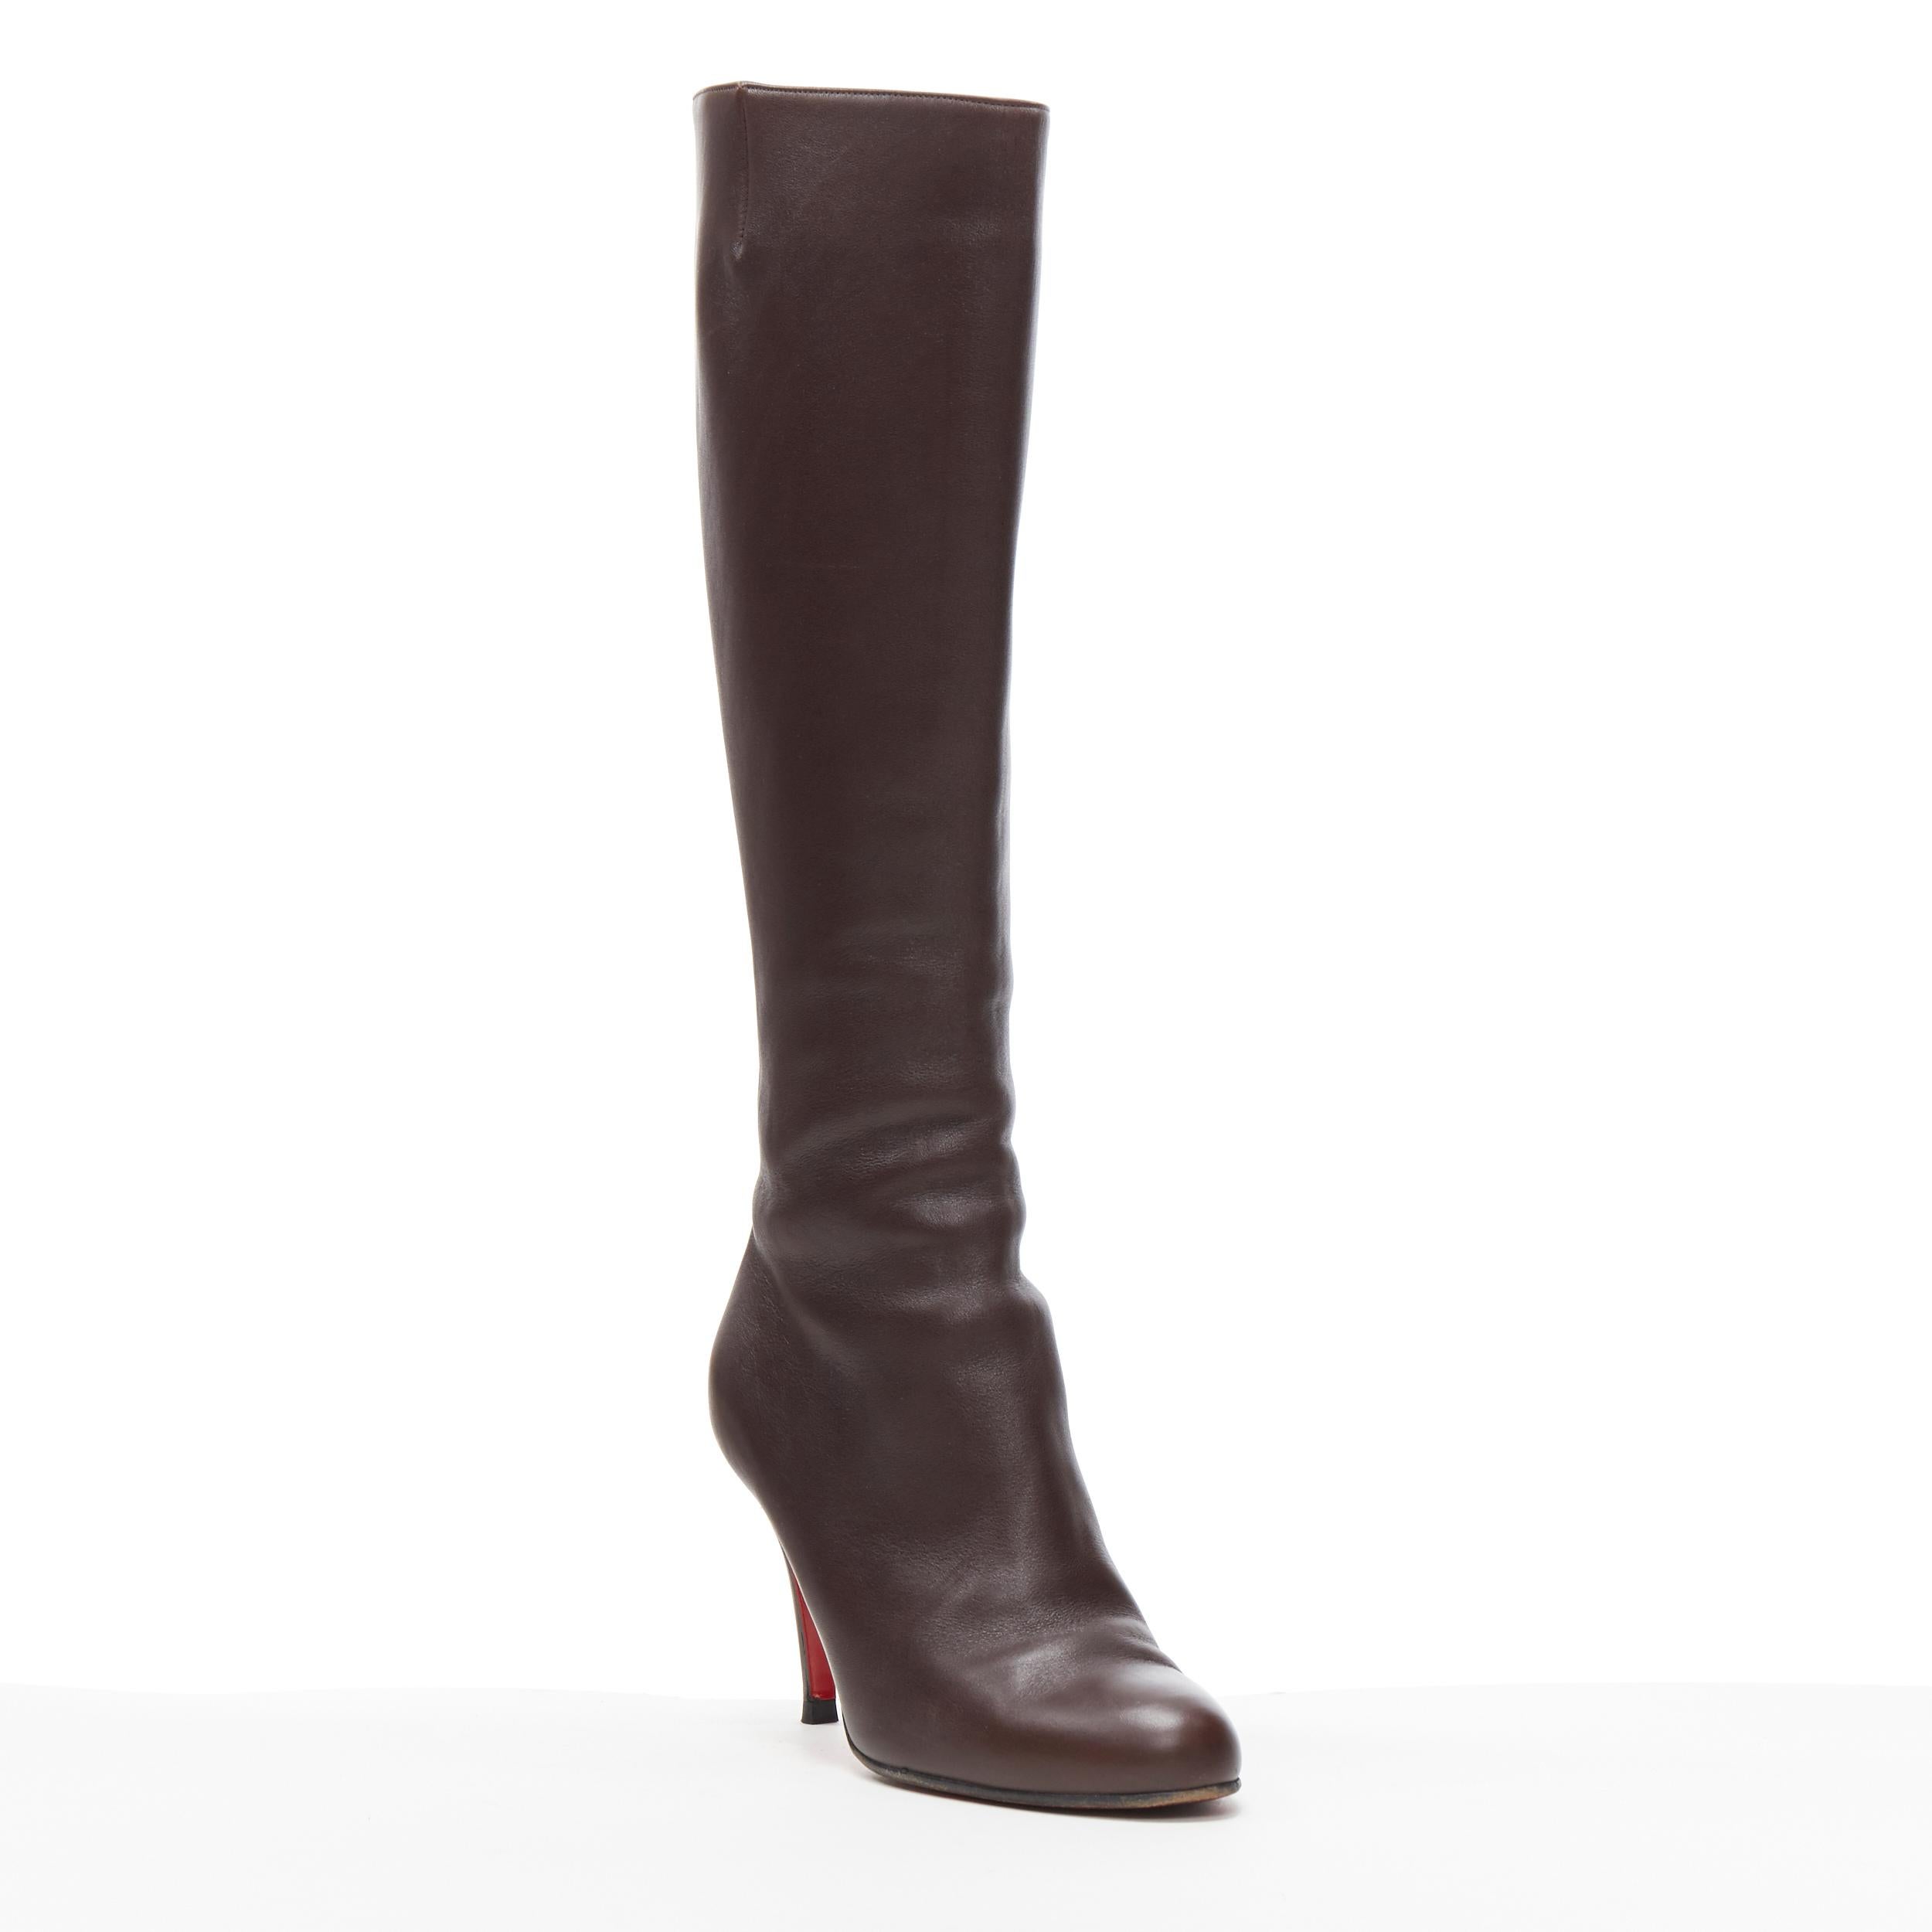 CHRISTIAN LOUBOUTIN dark brown leather almond toe high heel tall boots EU39
Brand: Christian Louboutin
Designer: Christian Louboutin
Model Name / Style: Tall boot
Material: Leather
Color: Brown
Pattern: Solid
Closure: Zip
Extra Detail: Almond toe.